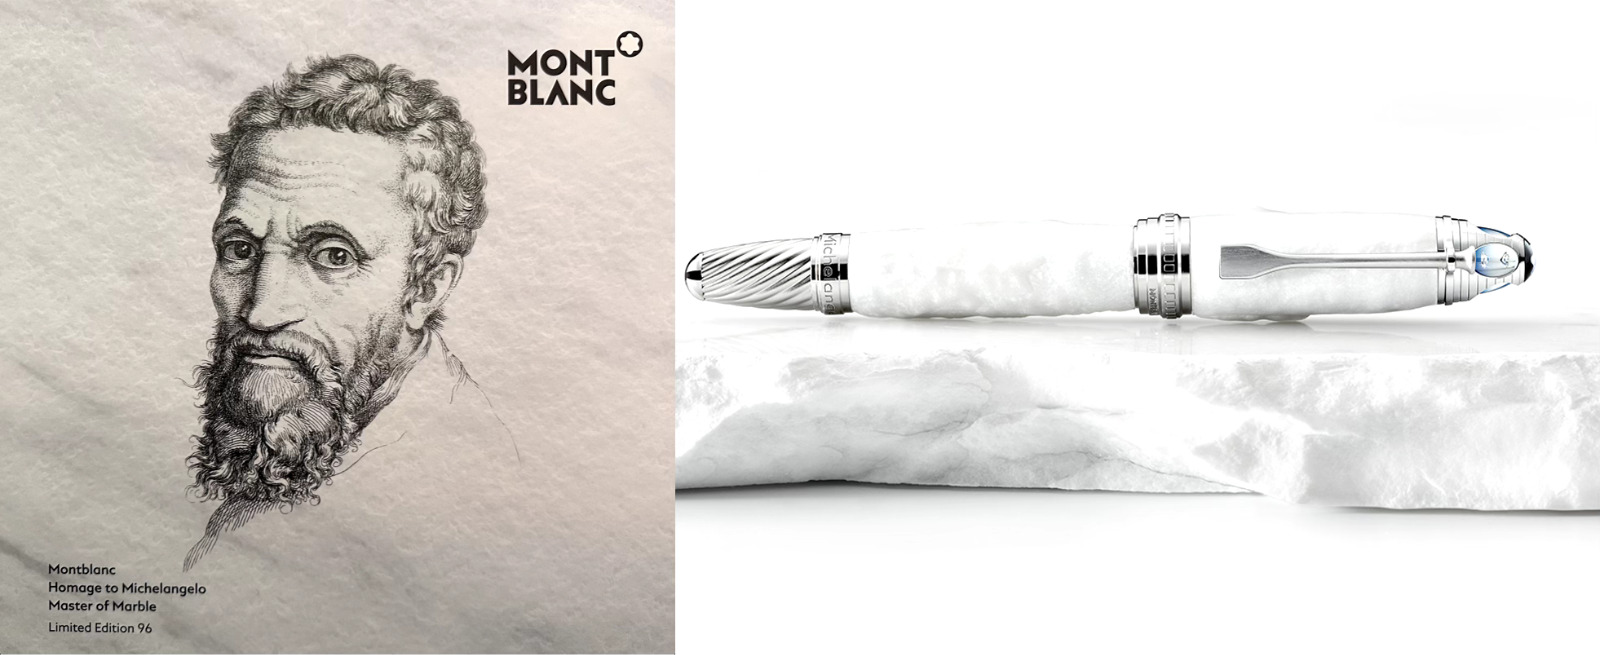 Montblanc Master of Marble Homage to Michelangelo - Limited Edition 96